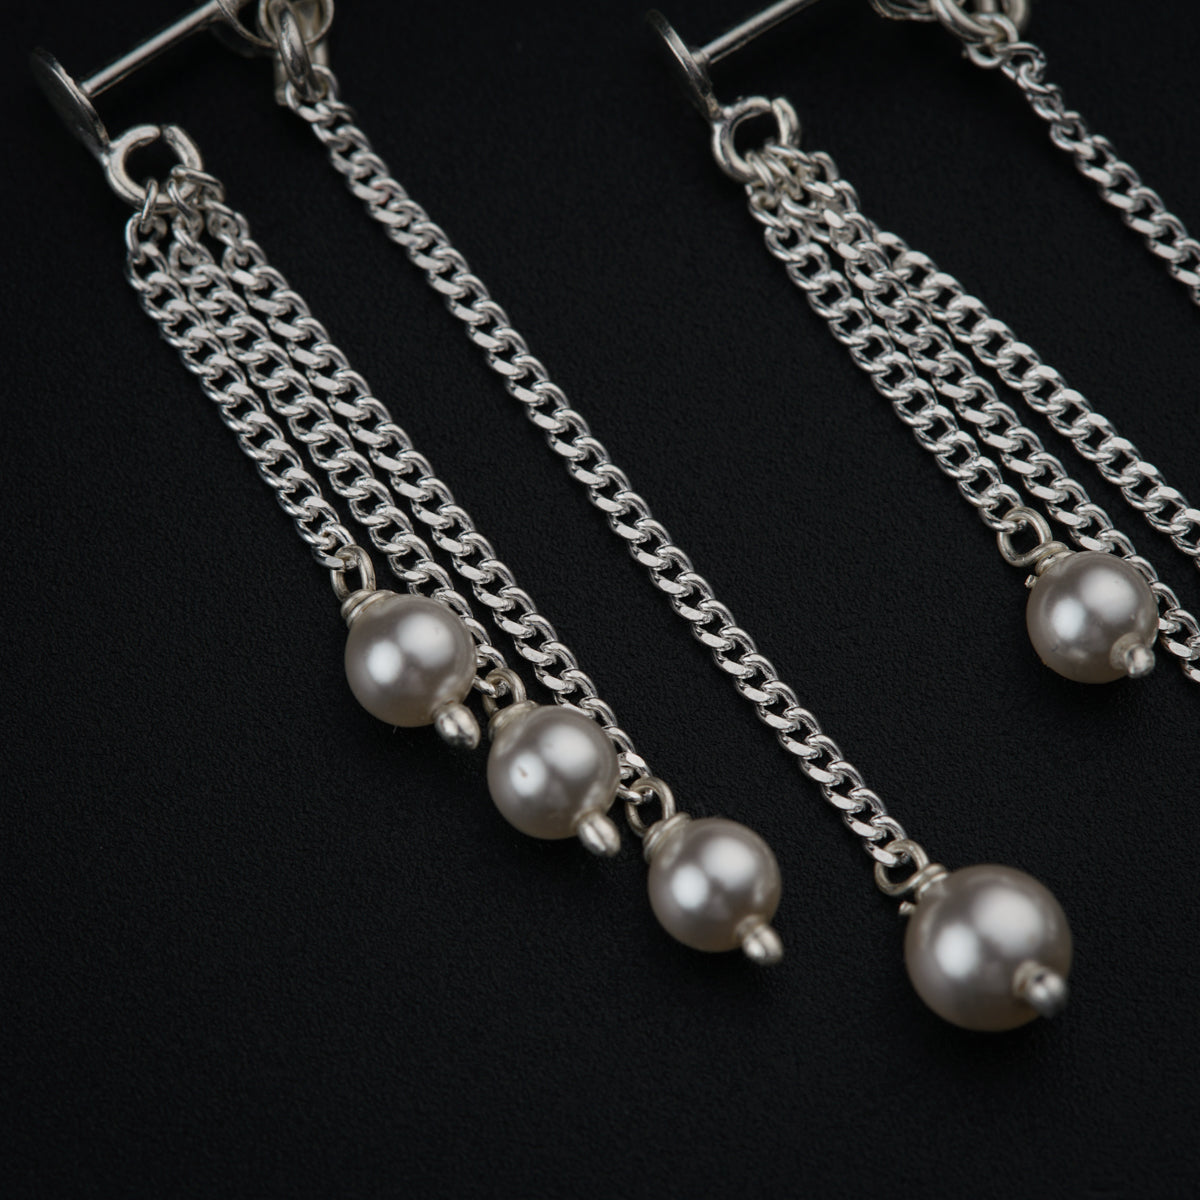 a pair of earrings with pearls hanging from chains